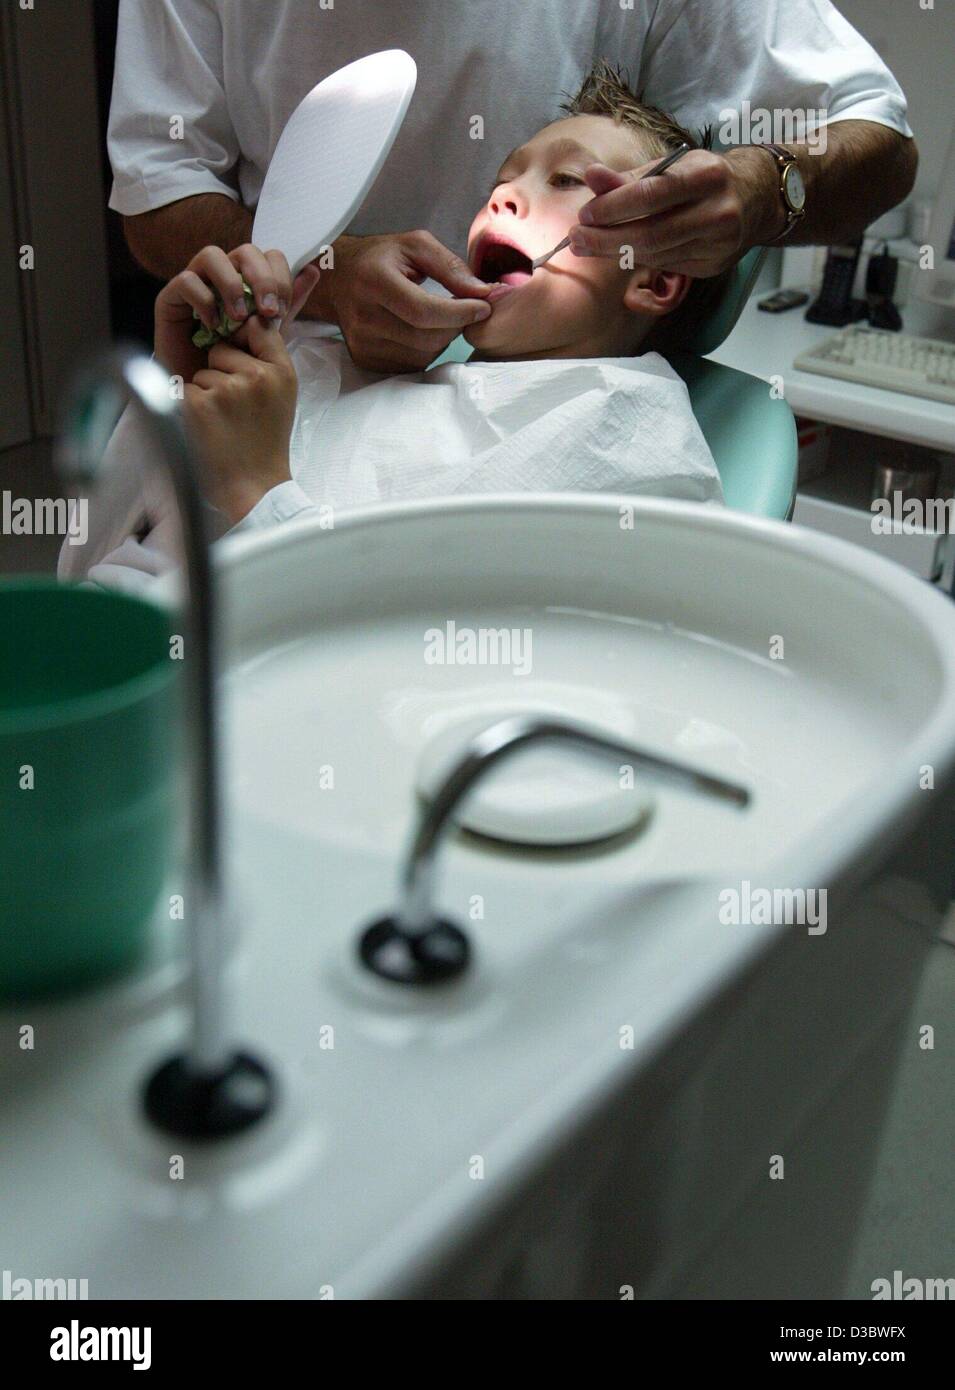 (dpa) - A dentist examines the teeth of a boy in a practice in Magdeburg, Germany, 18 August 2003. The envisaged healthcare reform of the German government will result in deep cuts in the health and welfare systems. Germany's expensive healthcare system which is funded entirely by levies on payrolls Stock Photo